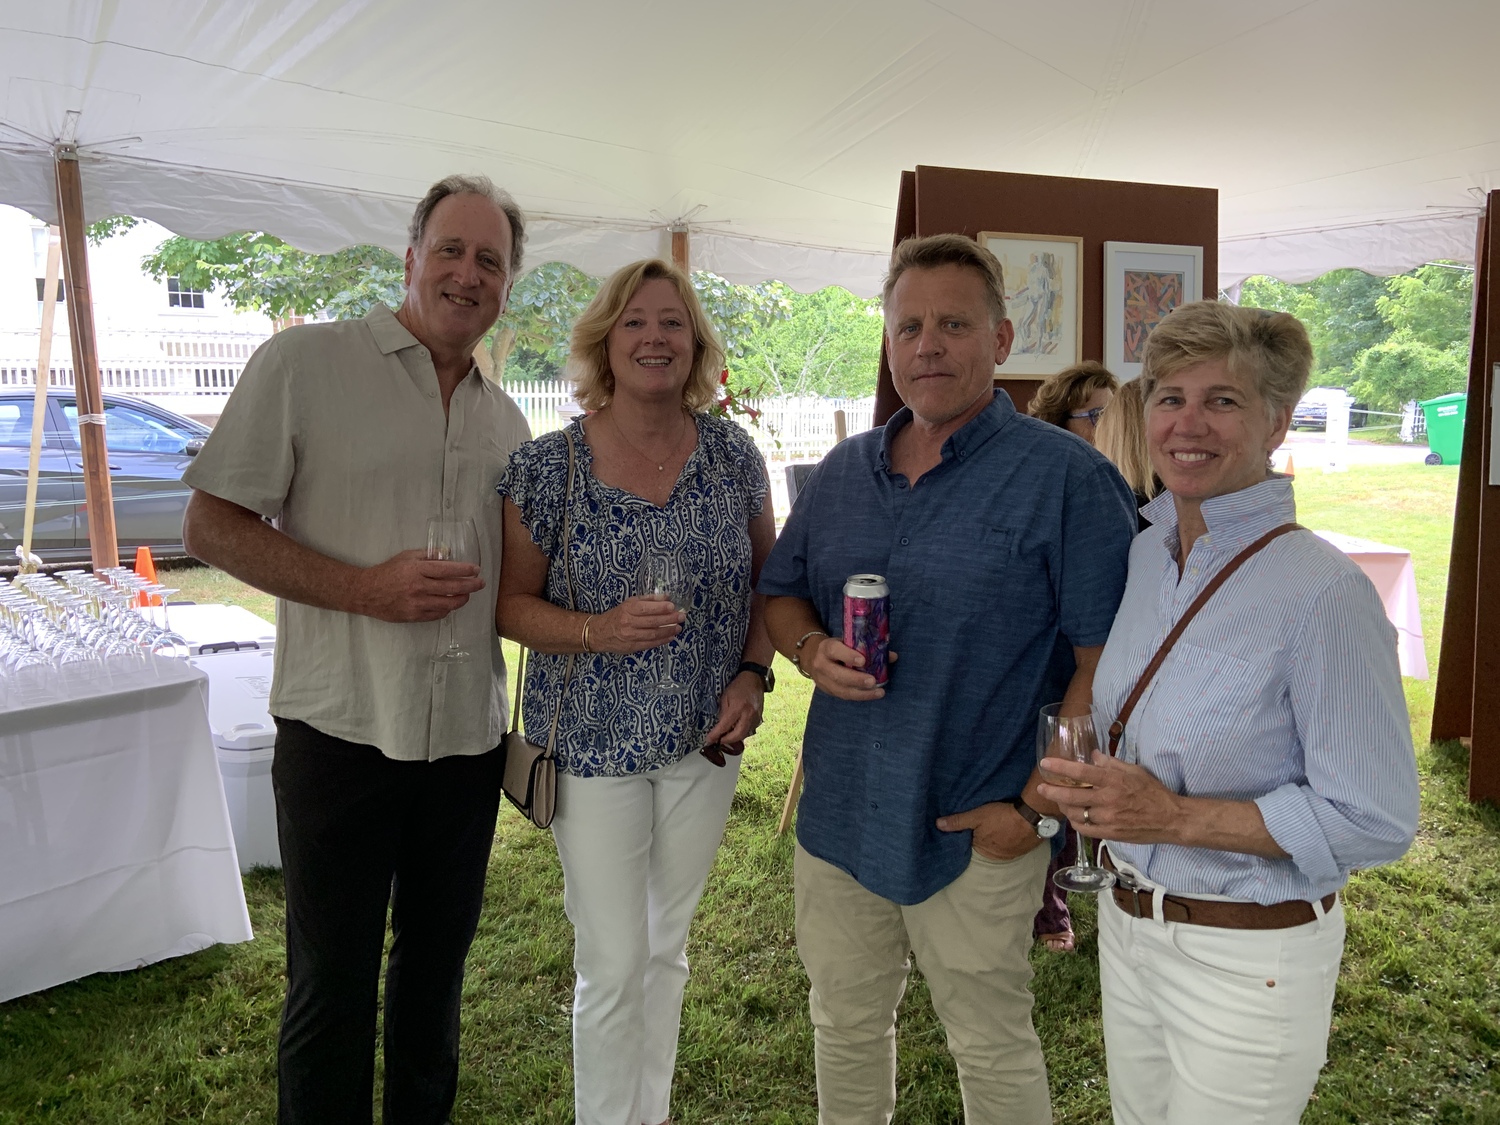 Tom and Gayle Heine and Dave and Dawn Harvey at the Sag Harbor Historical Museum's annual summer fundraising party. STEPHEN J. KOTZ